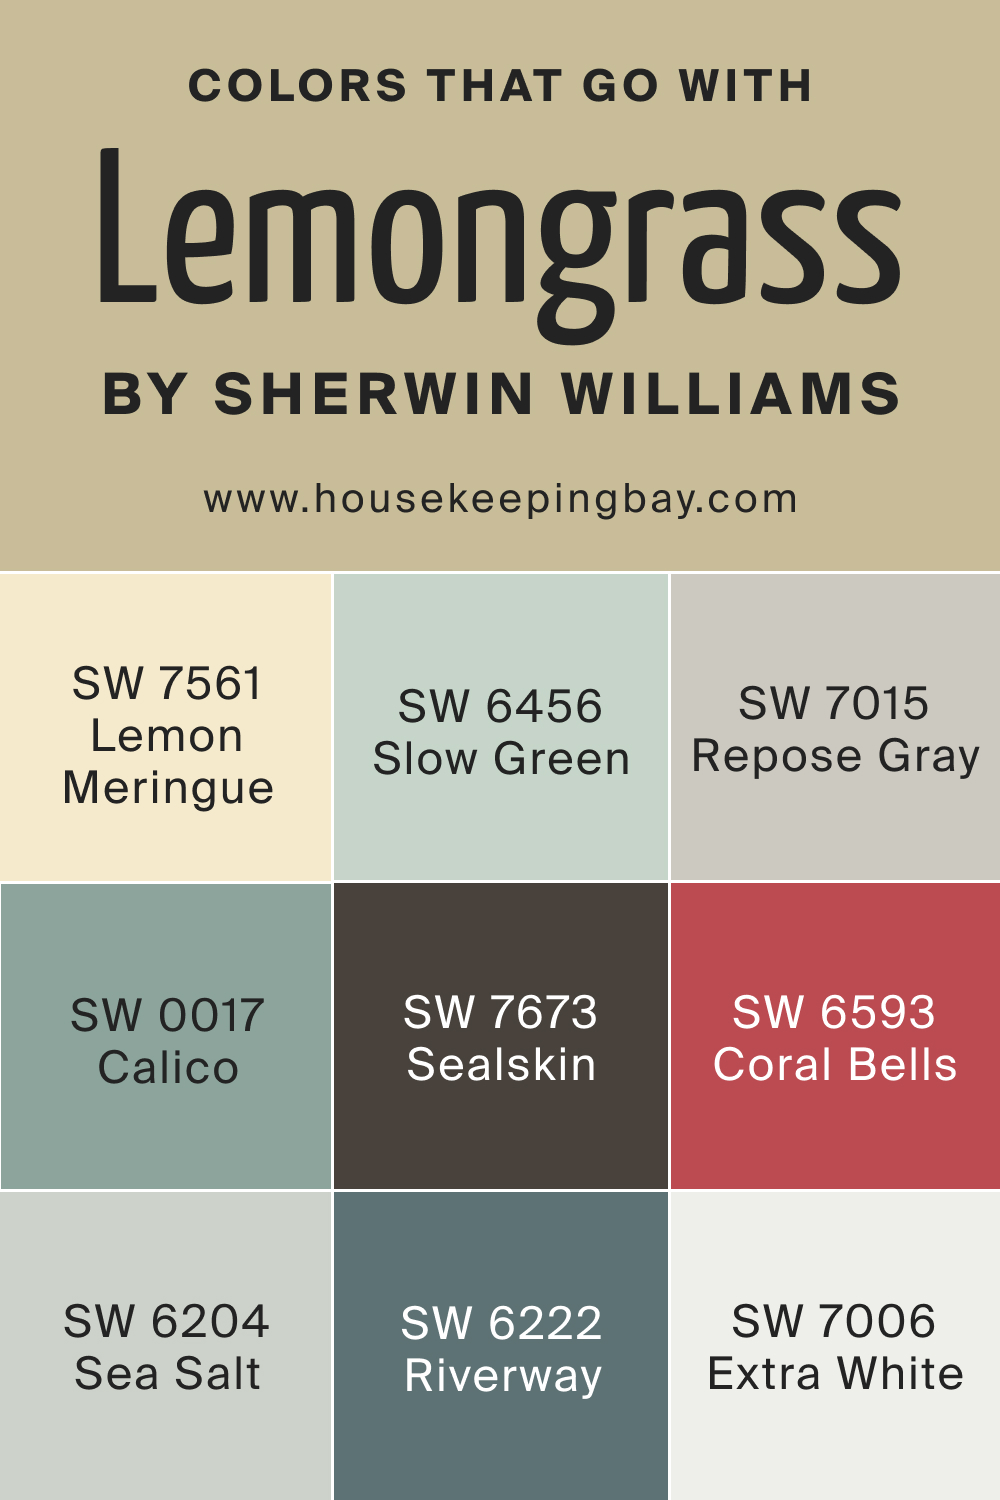 Colors that goes with SW 7732 Lemongrass by Sherwin Williams